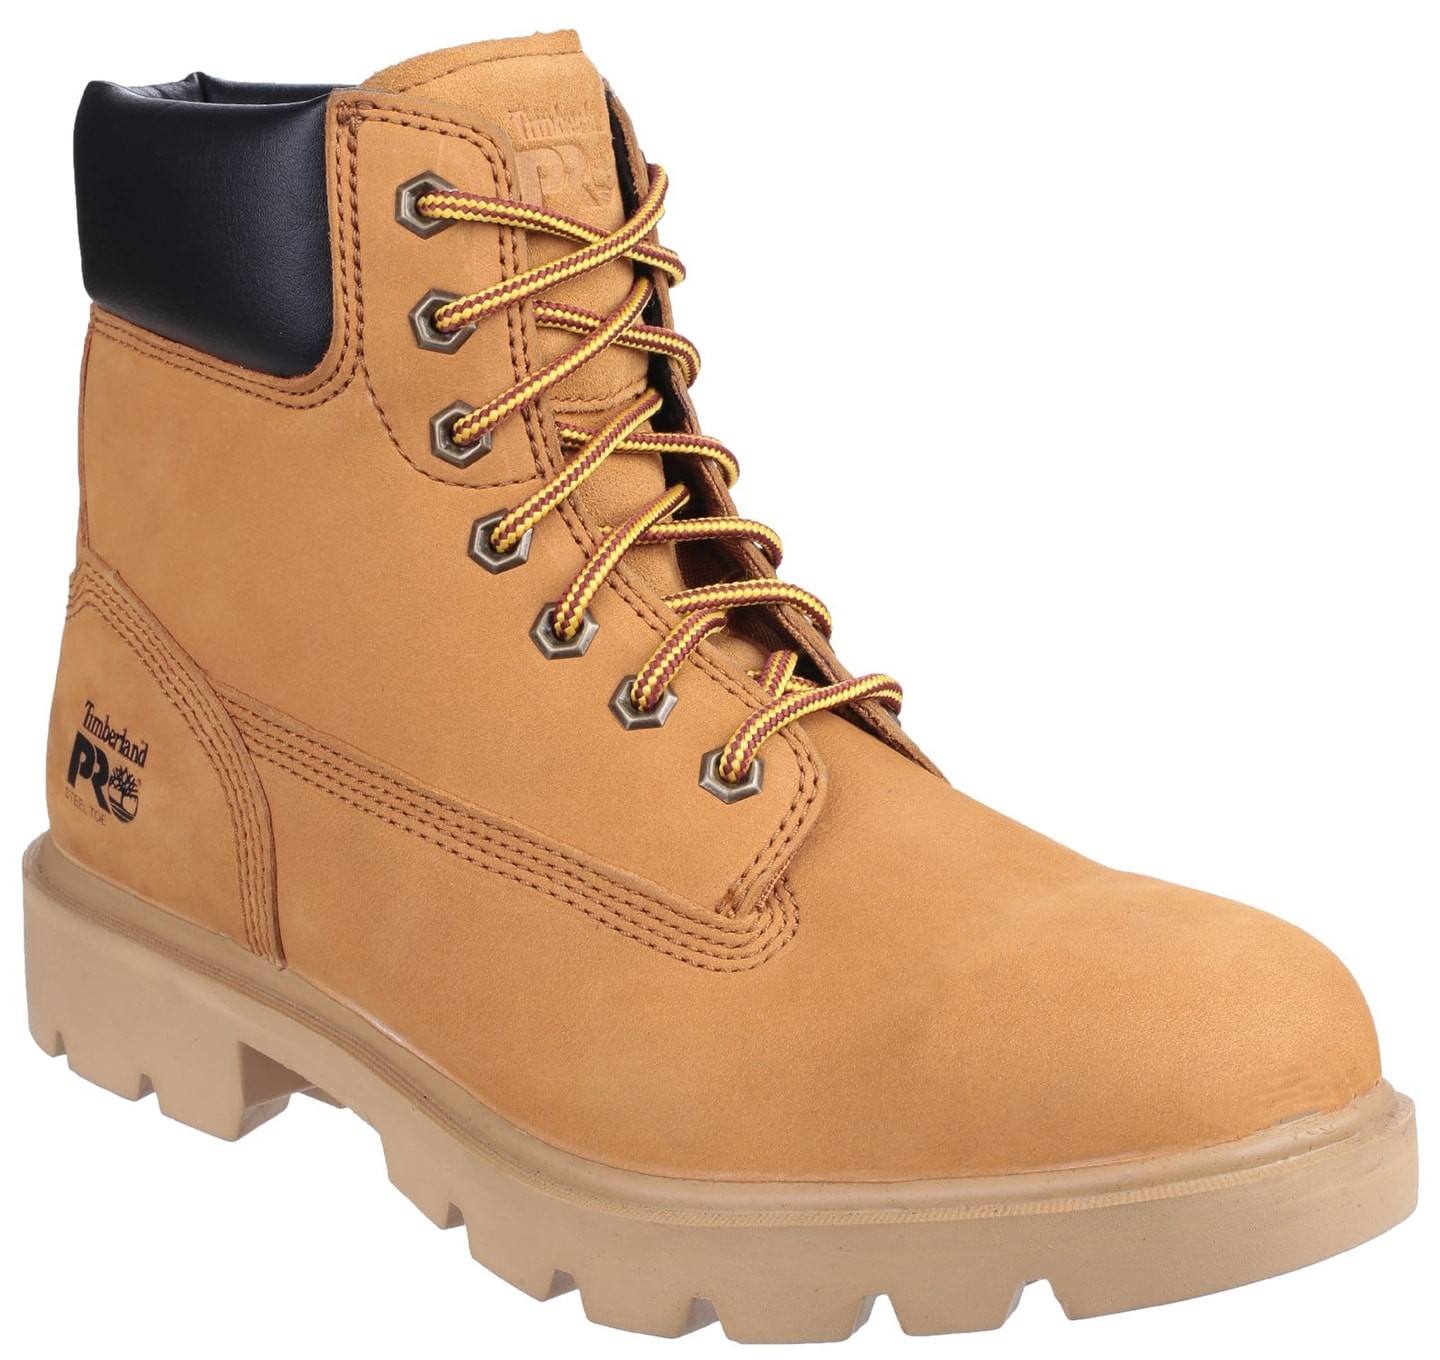 Sawhorse Lace Up Wheat Safety Boot